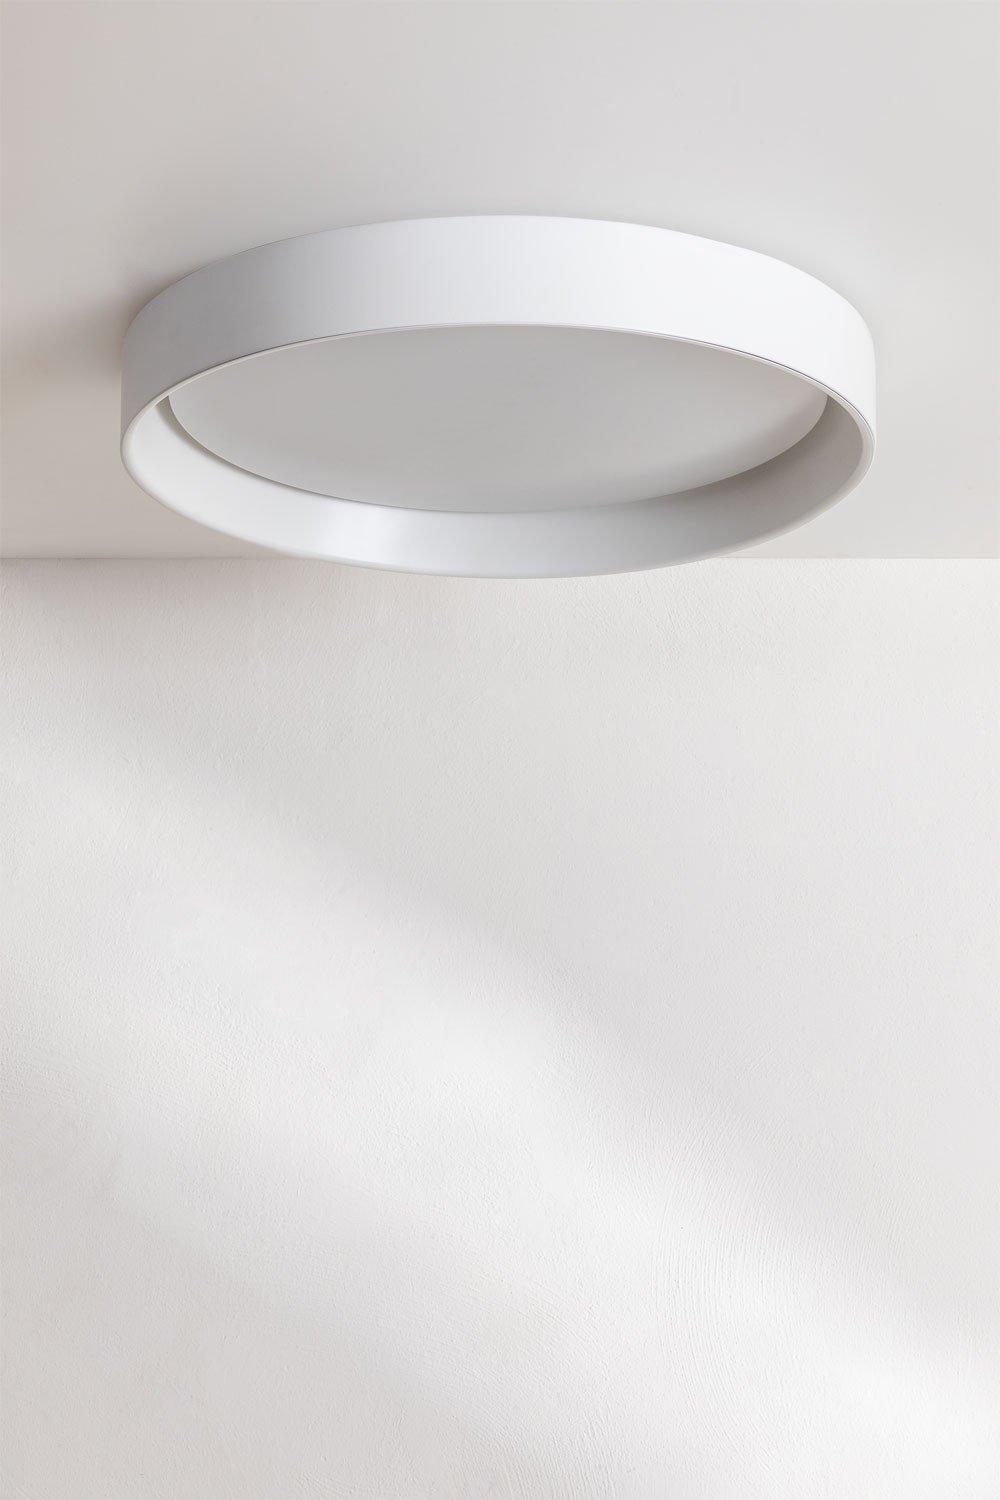 LED ceiling light in Iron Zekri, gallery image 1